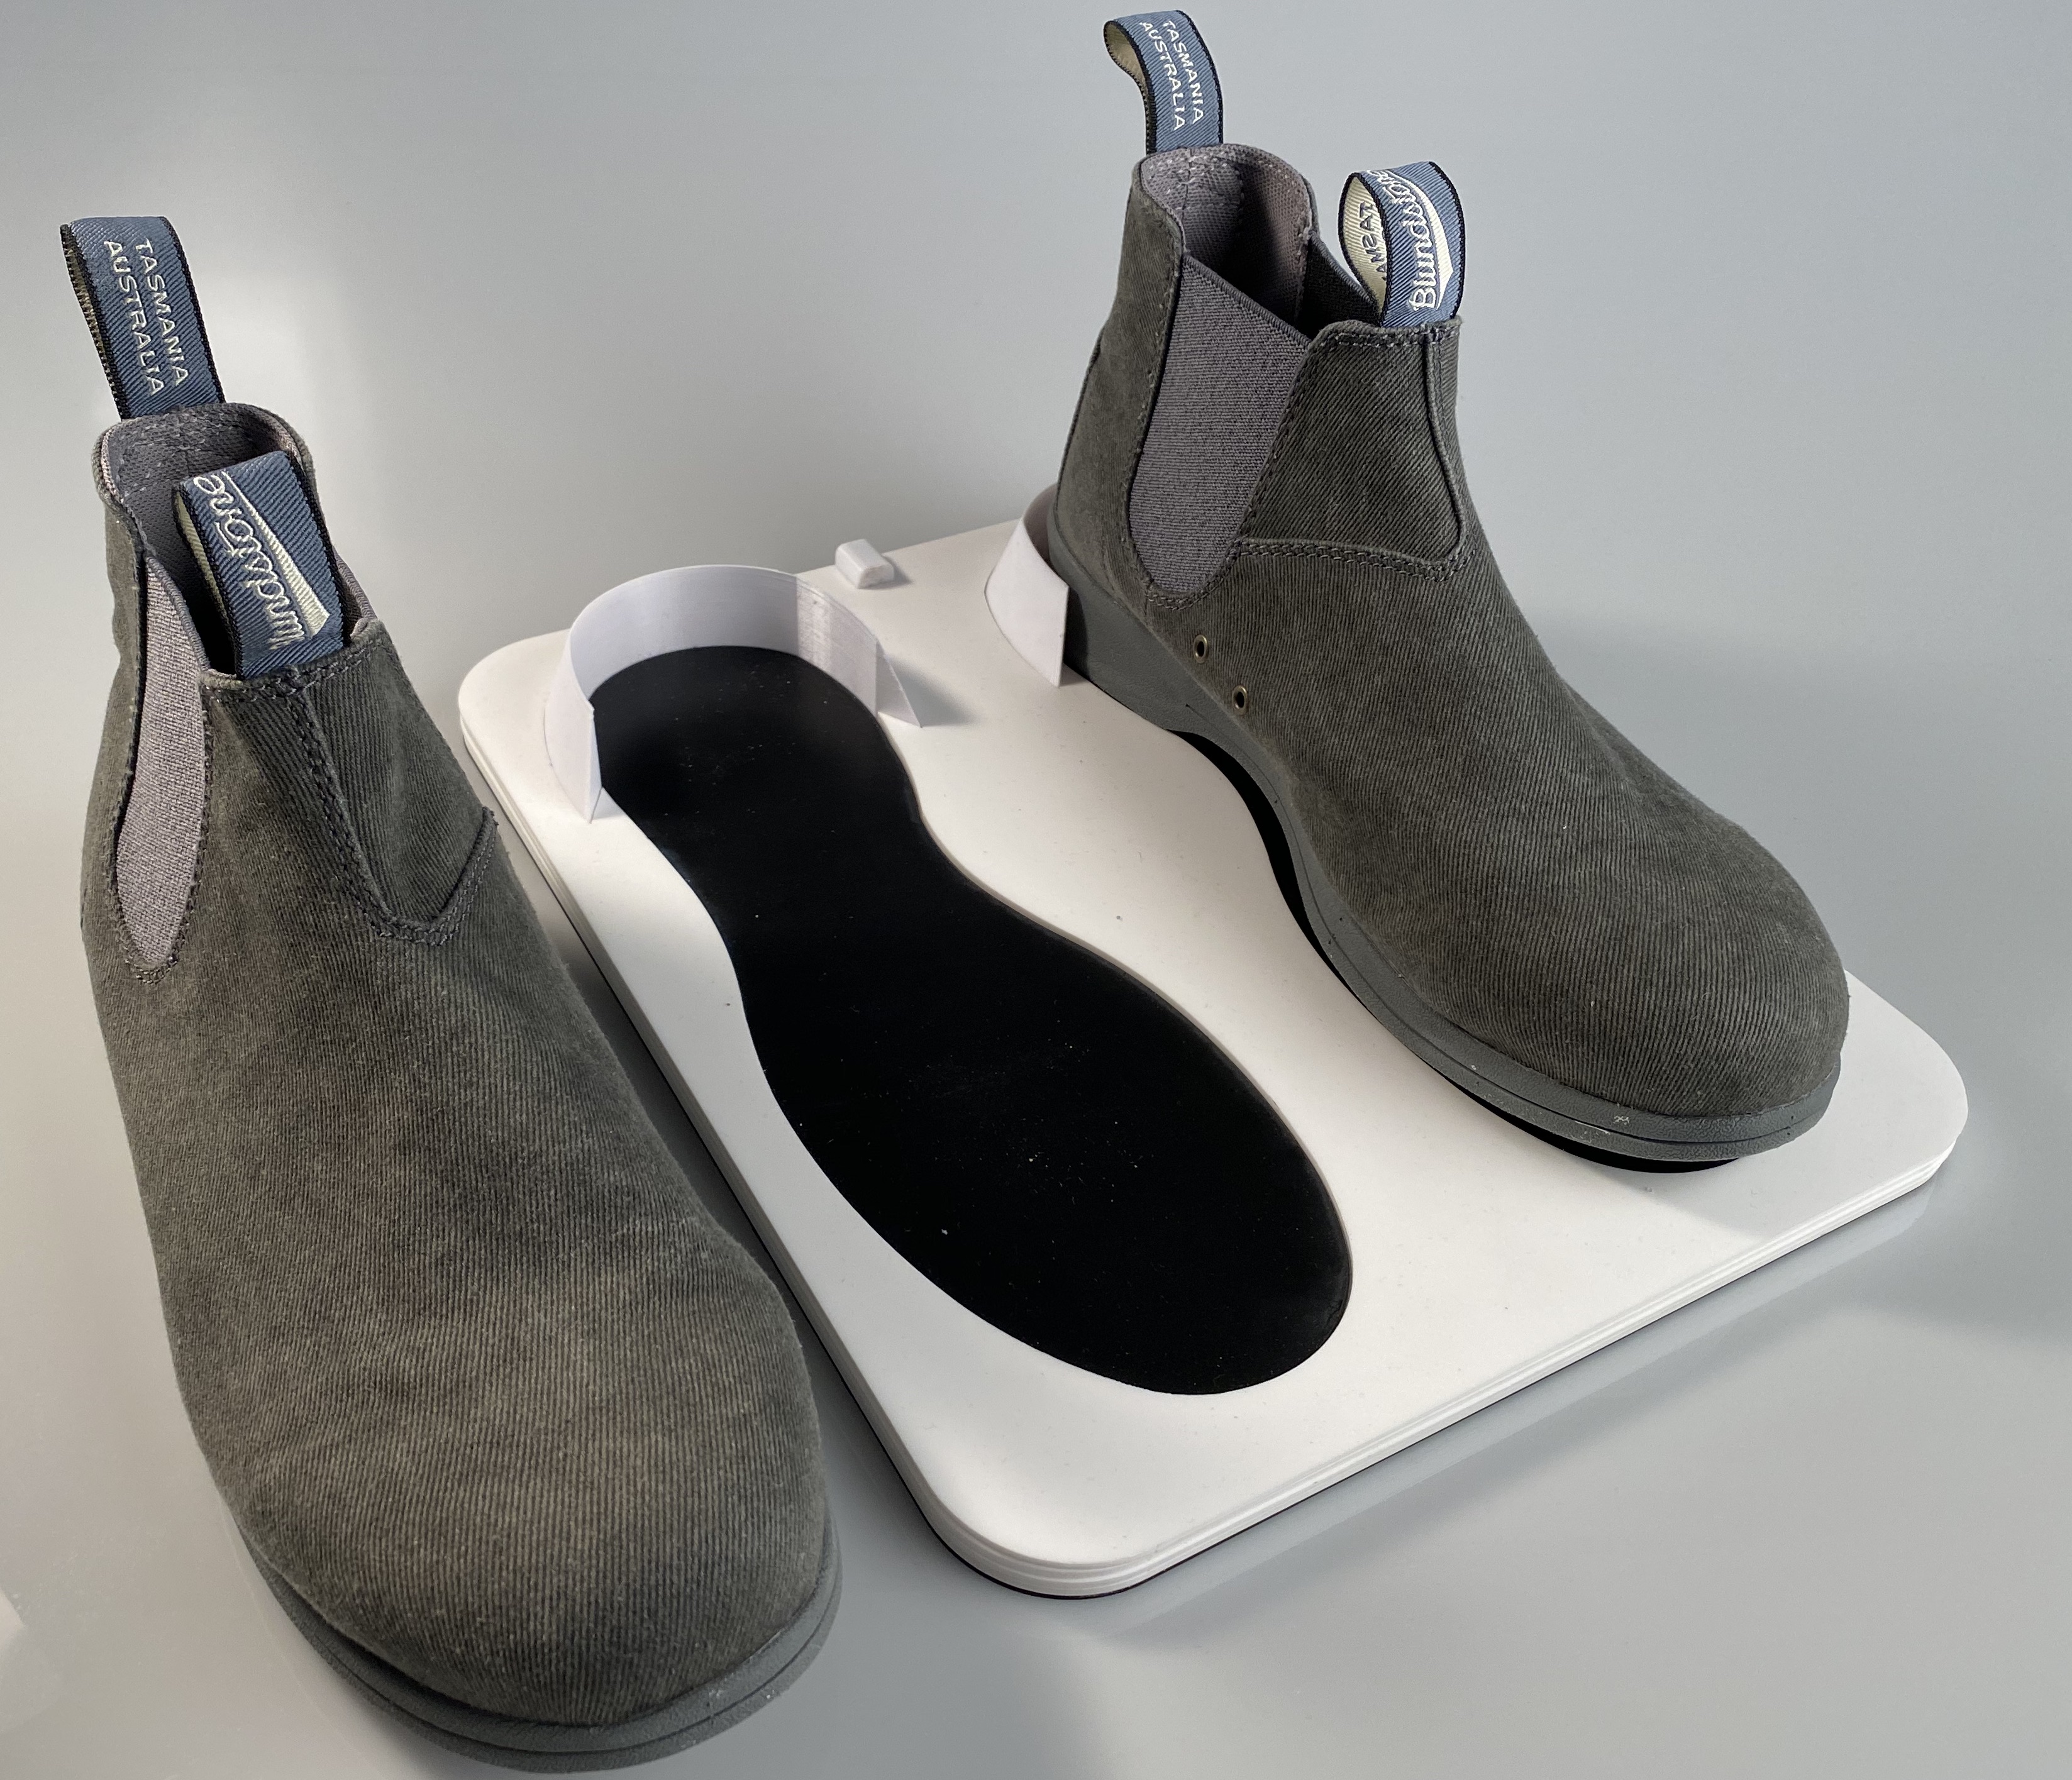 Smart Footwear Final Prototype with charger